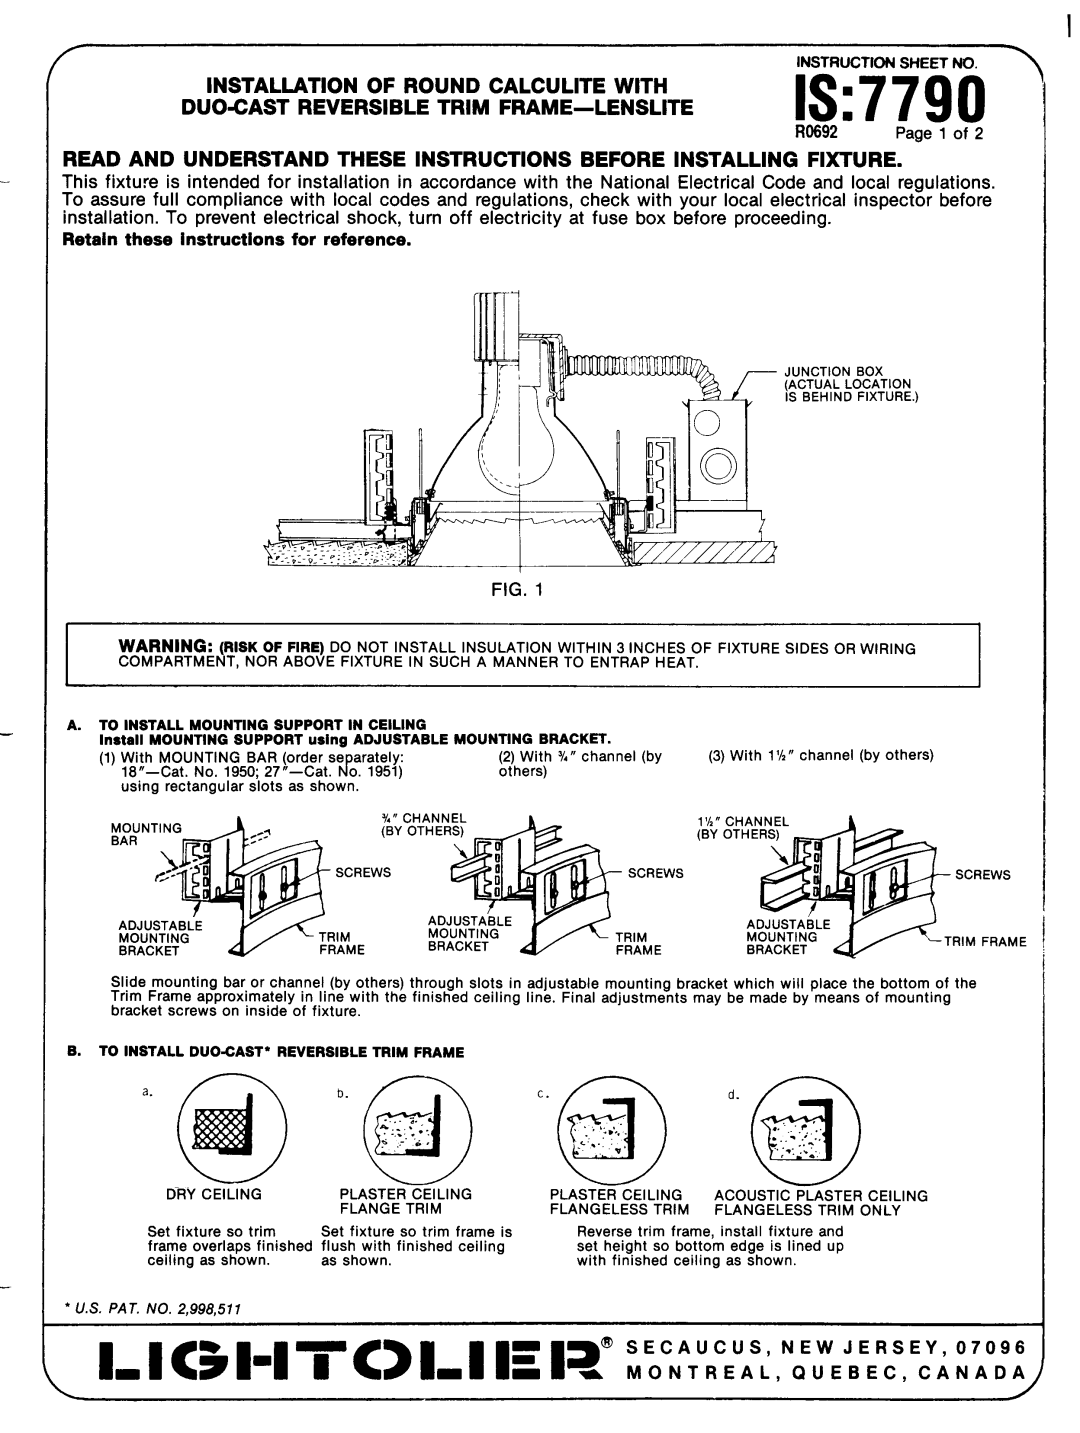 Lightolier 7790 instruction sheet R0692, Page 1 of, Retain these instructions for reference, Is, 1’/2”, Mounting Bracket 